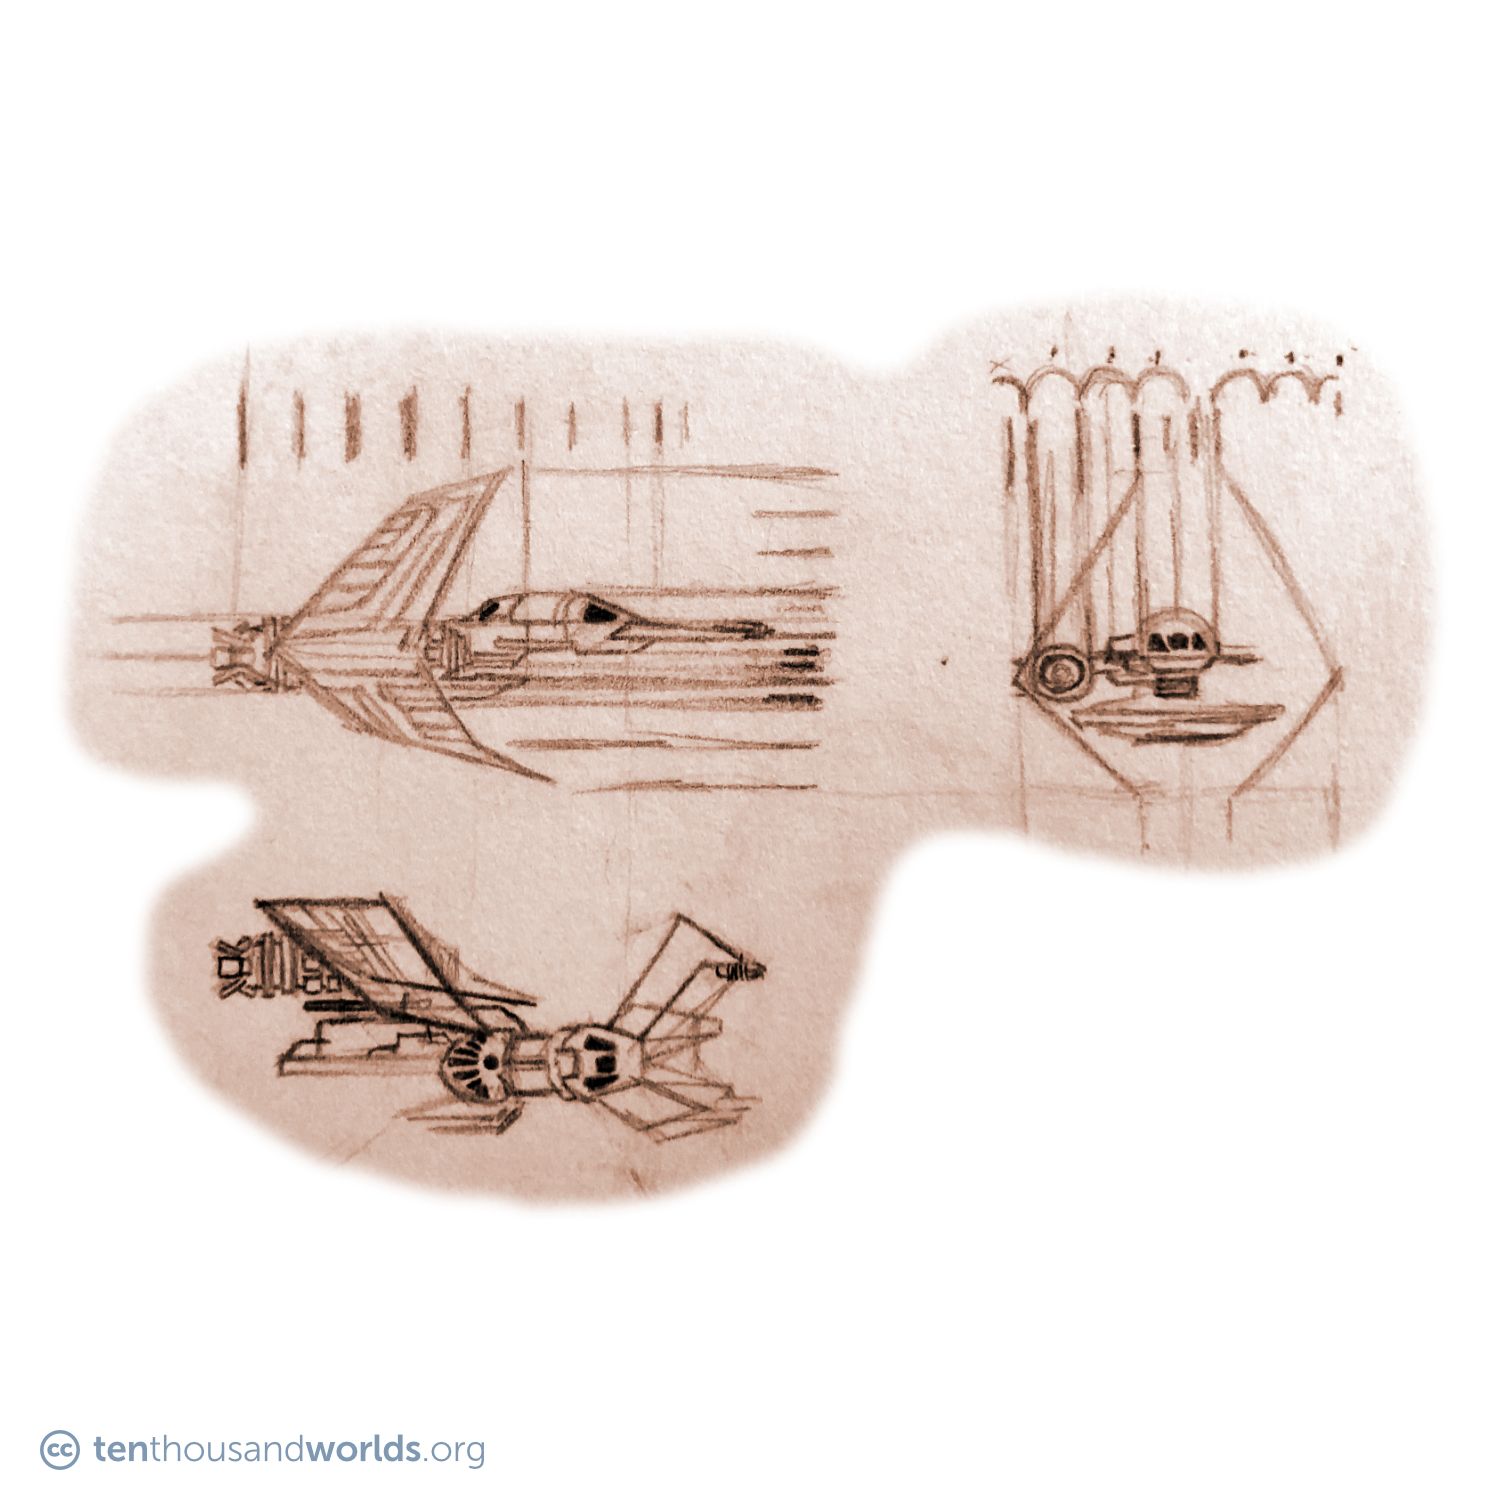 A pencil sketch of a twin-engine spaceship seen from the port side, front, and from above, with a silhouette that looks wildly different in each view, due to the odd angles and shapes of its bent wings, canards, and secondary hull.